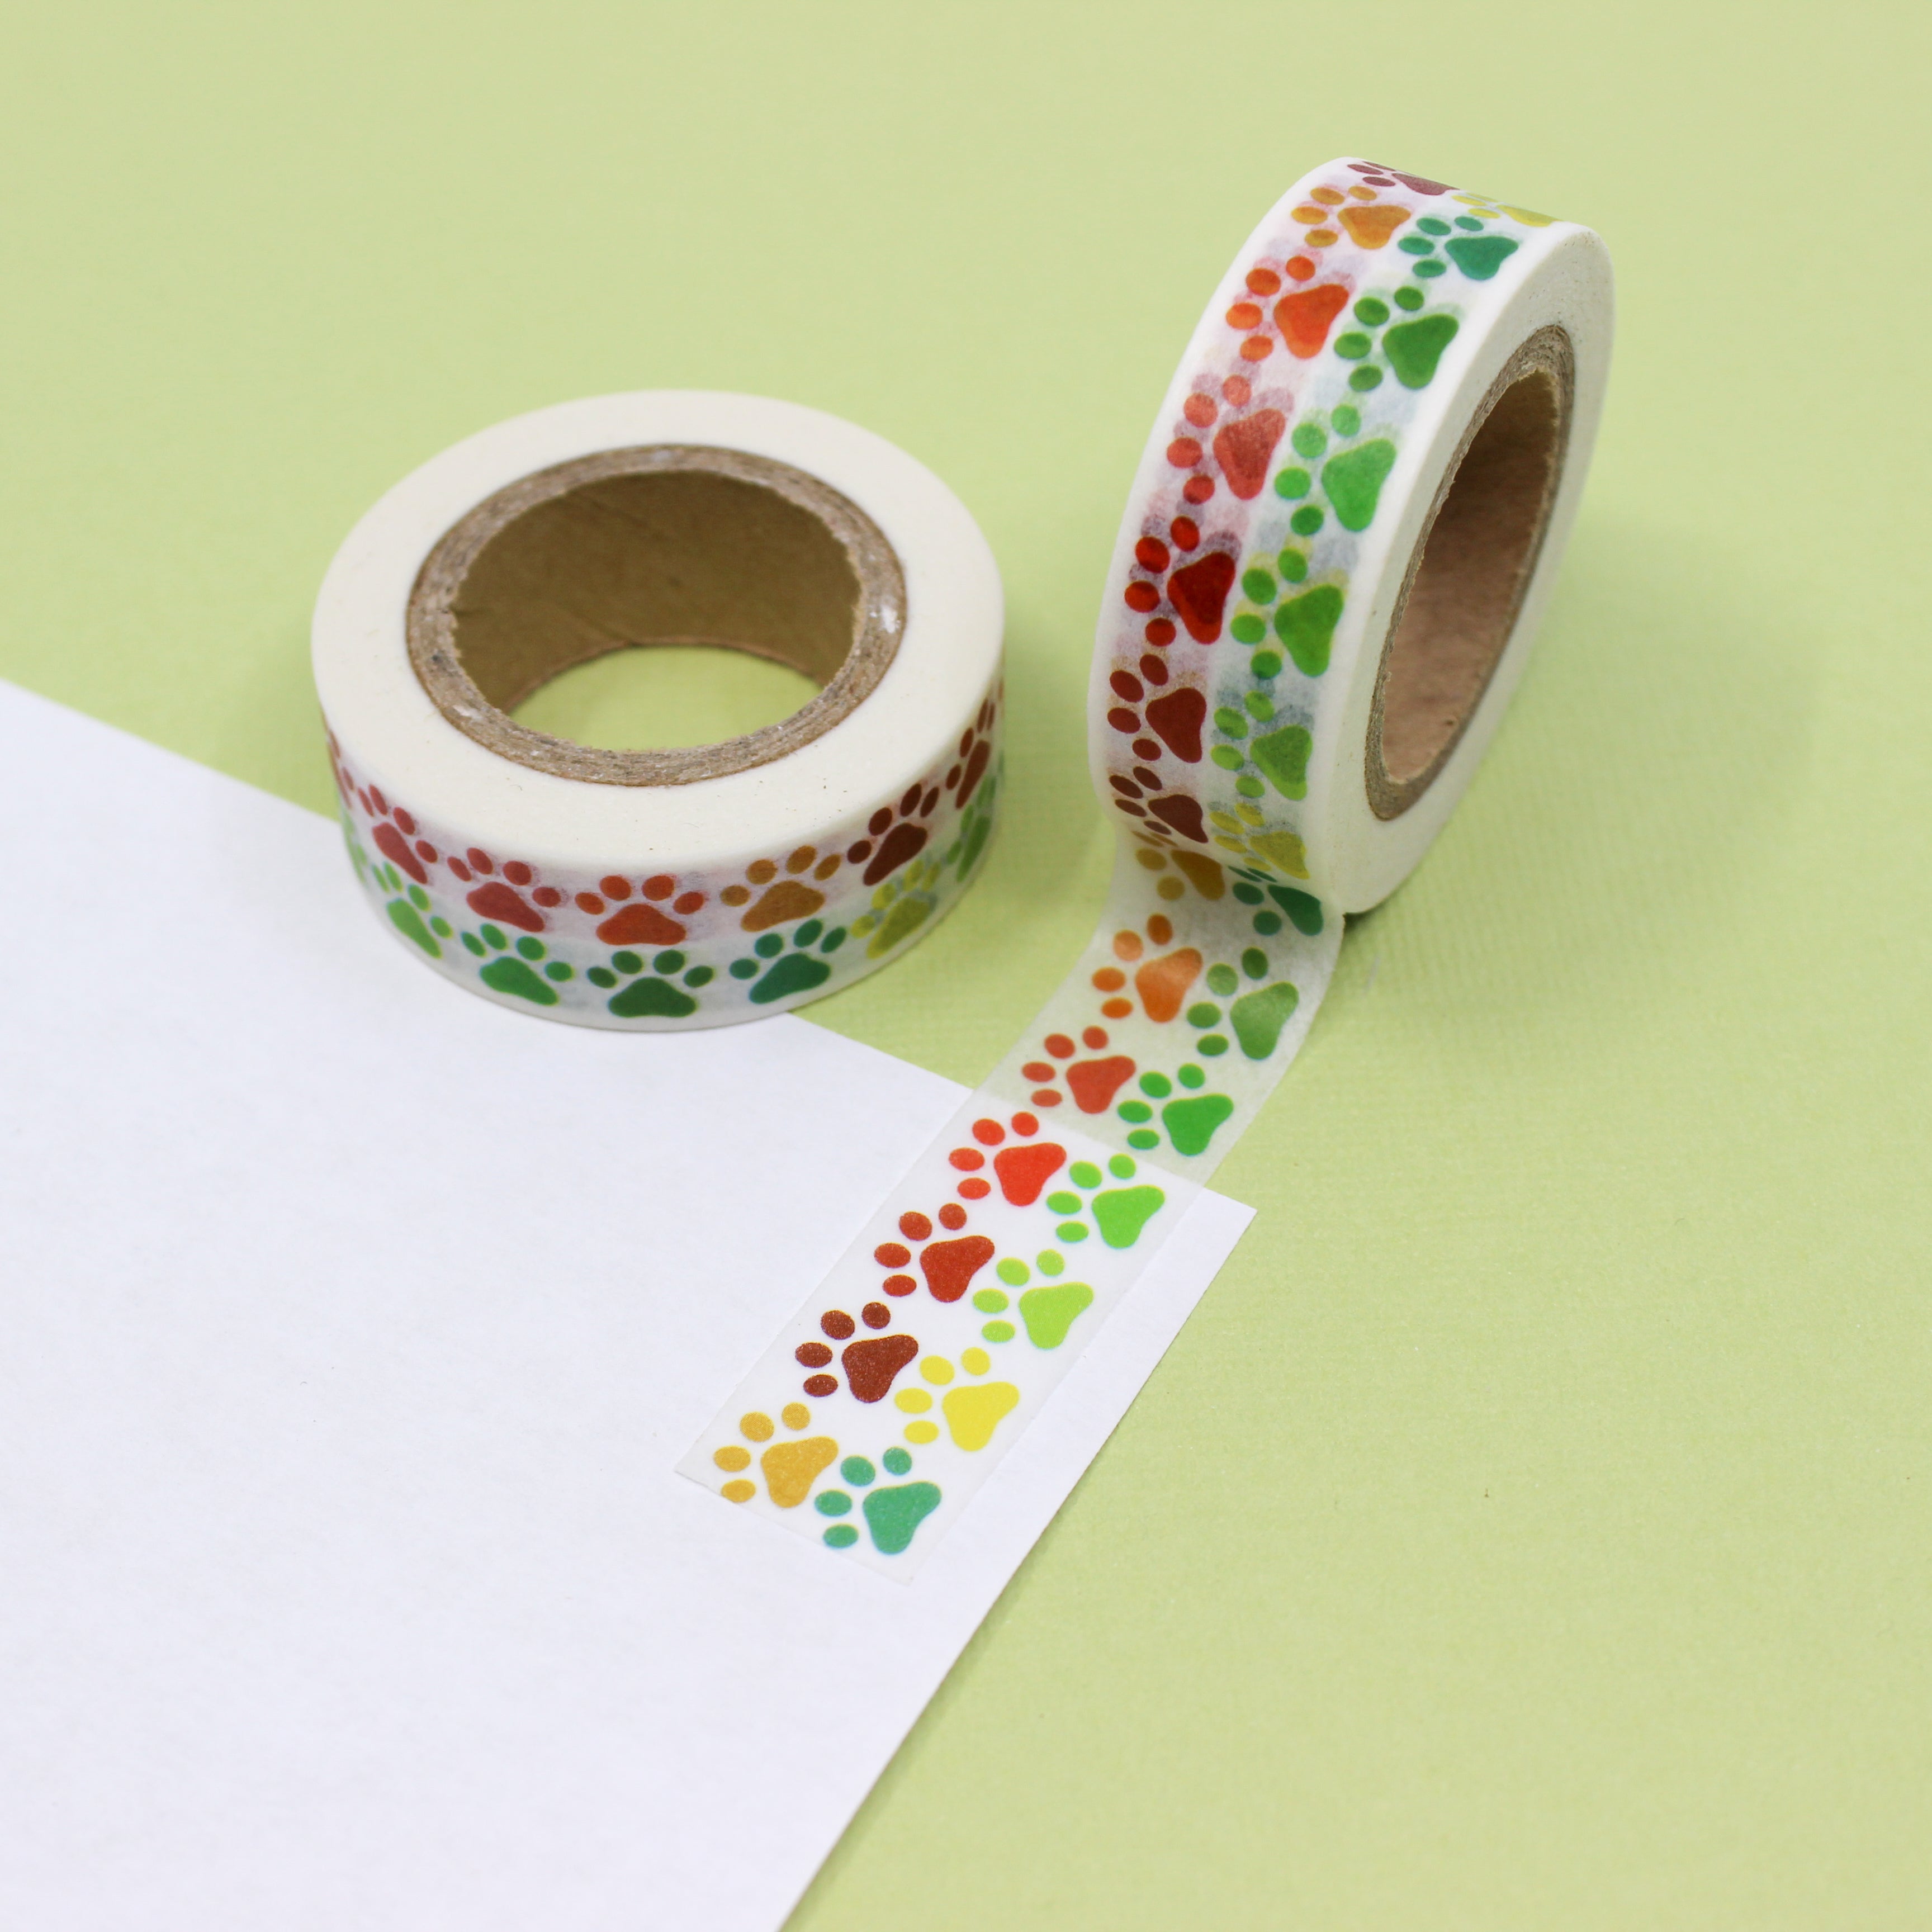 This is a colorful red and green animal paw prints view themed washi tape from BBB Supplies Craft Shop